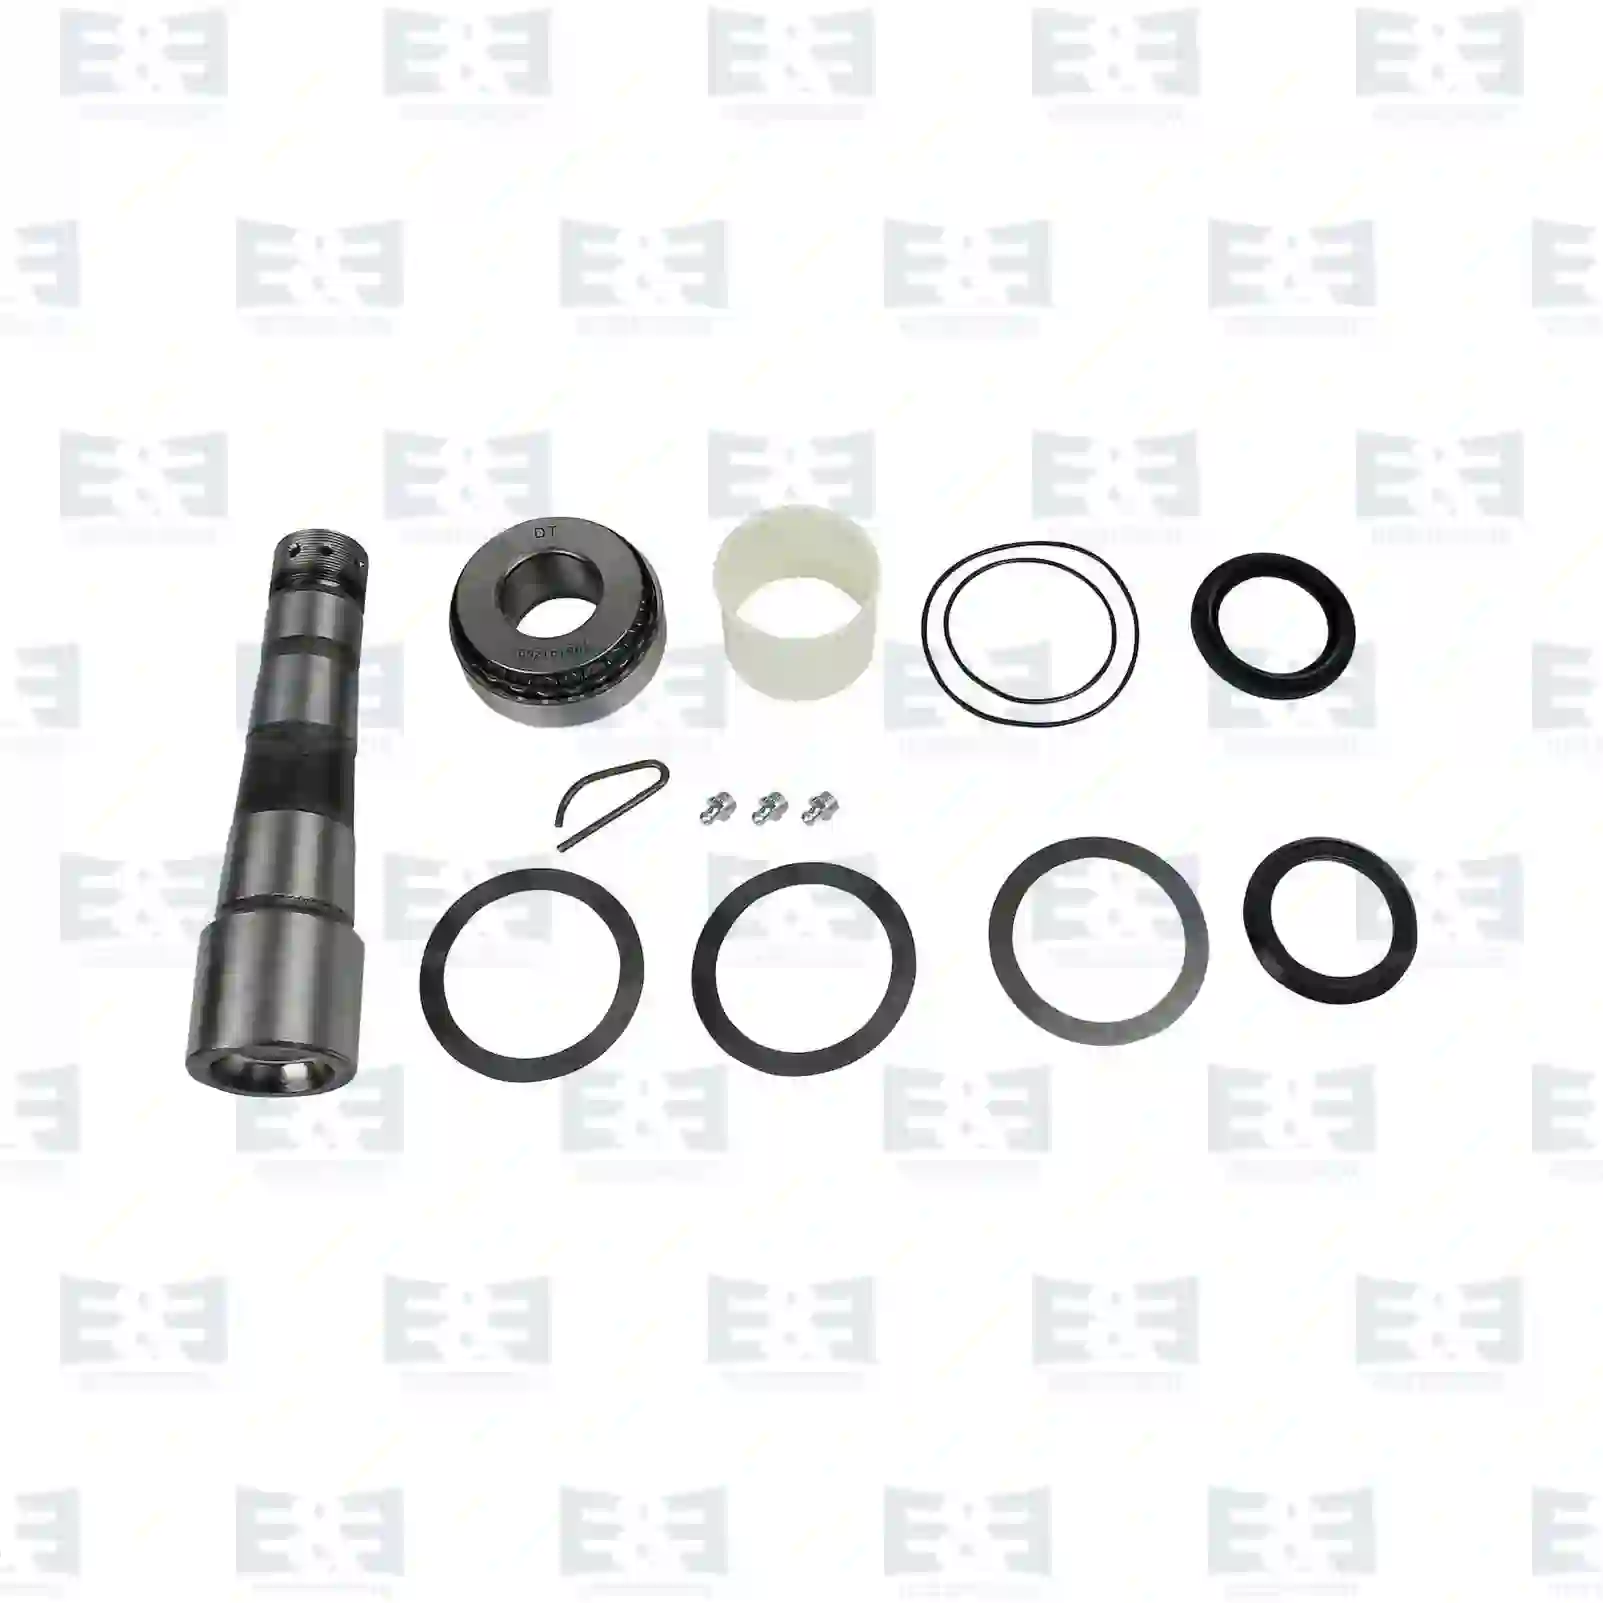 King pin kit, with bearing, 2E2279686, 3093731S, ZG41296-0008, , ||  2E2279686 E&E Truck Spare Parts | Truck Spare Parts, Auotomotive Spare Parts King pin kit, with bearing, 2E2279686, 3093731S, ZG41296-0008, , ||  2E2279686 E&E Truck Spare Parts | Truck Spare Parts, Auotomotive Spare Parts